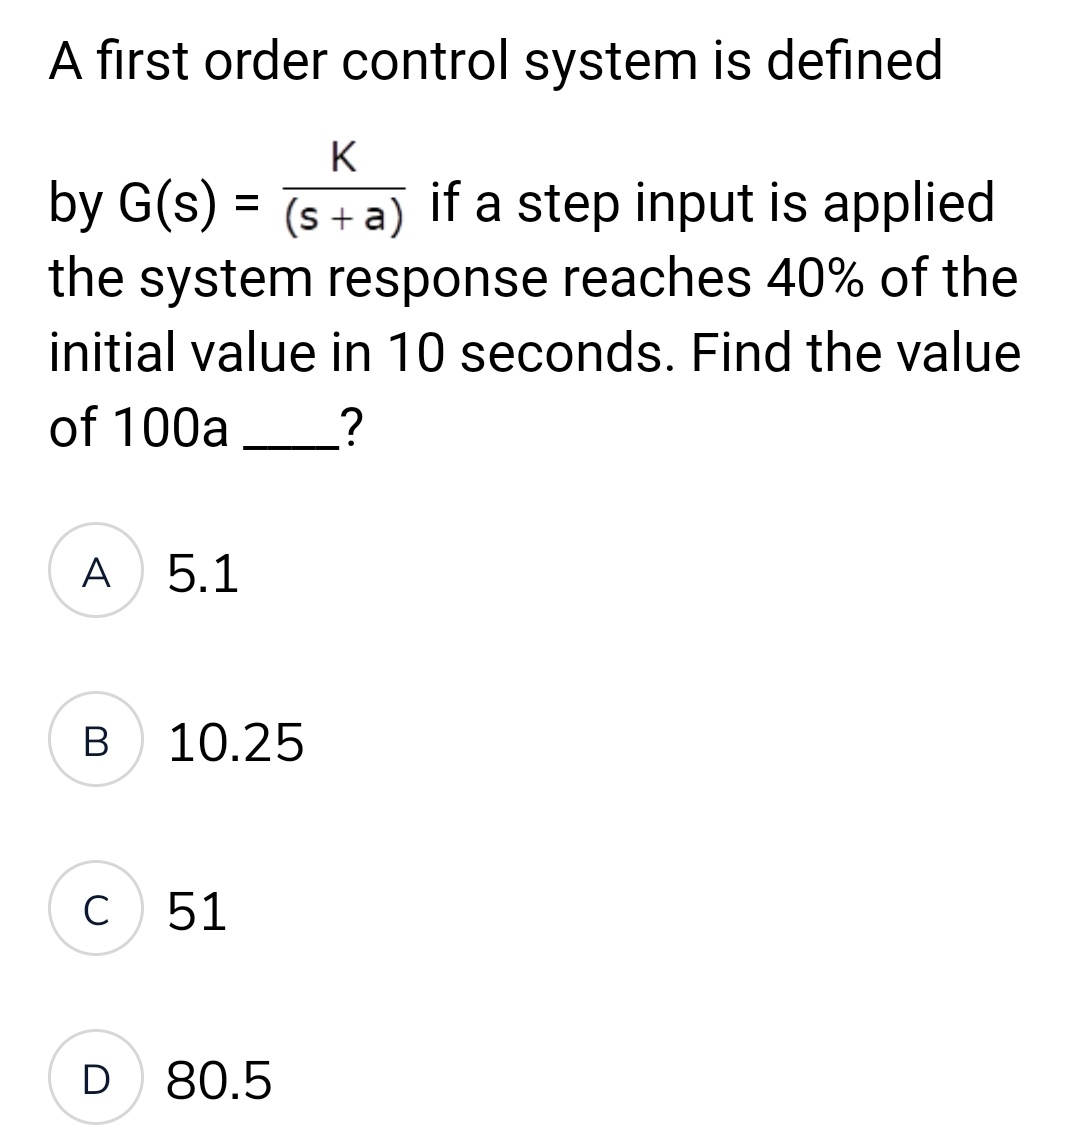 A first order control system is defined
K
by G(s) = (s+a) if a step input is applied
the system response reaches 40% of the
initial value in 10 seconds. Find the value
of 100a?
A 5.1
B
10.25
C 51
D 80.5